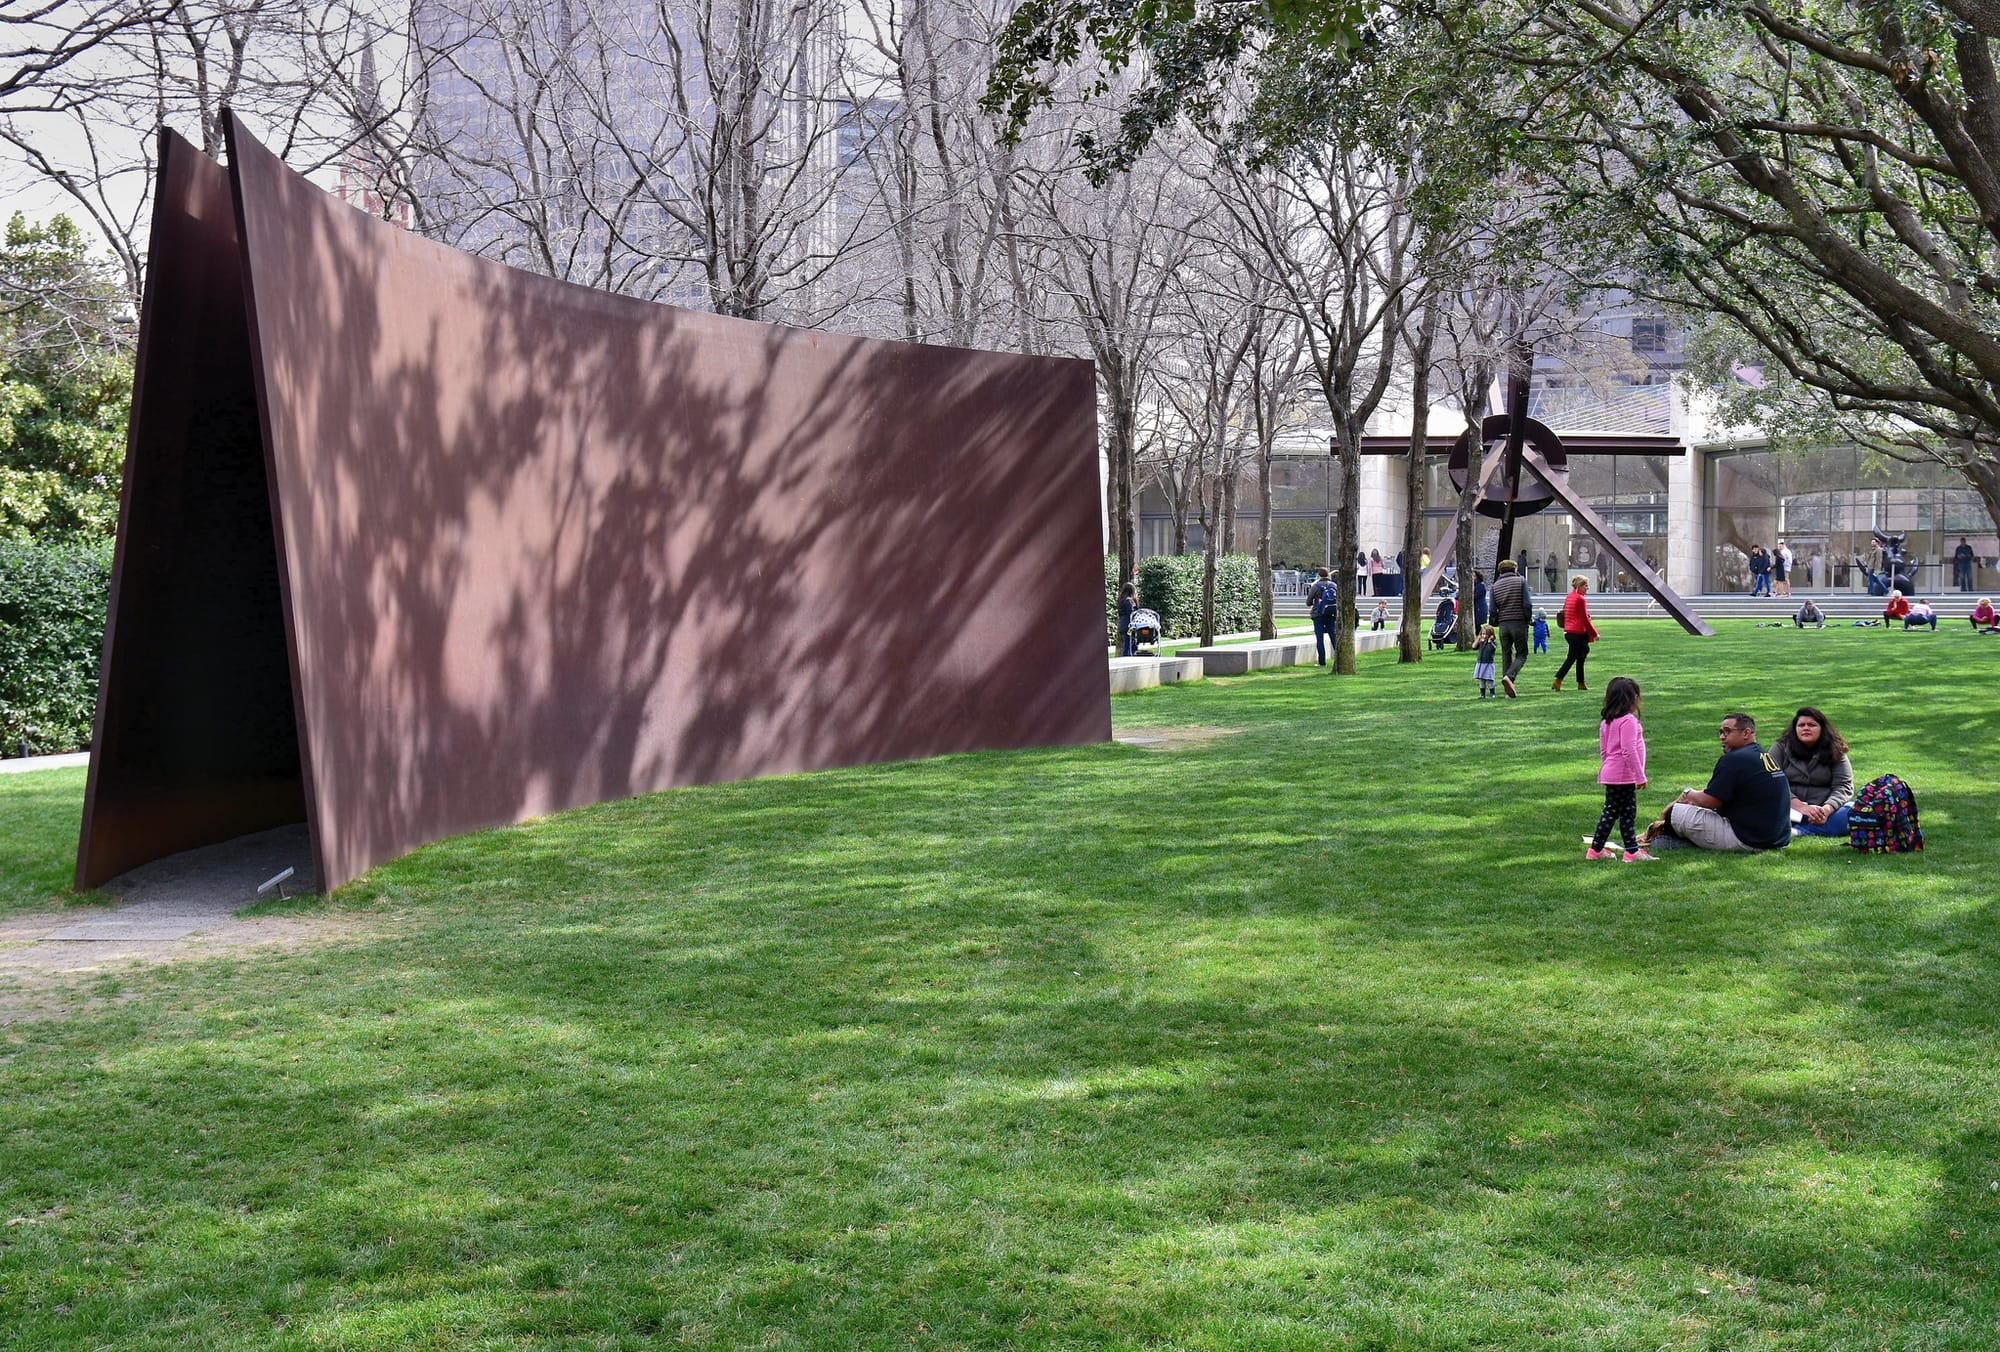 A sculpture garden featuring a Richard Serra work of two curved sheets of weathered steel.